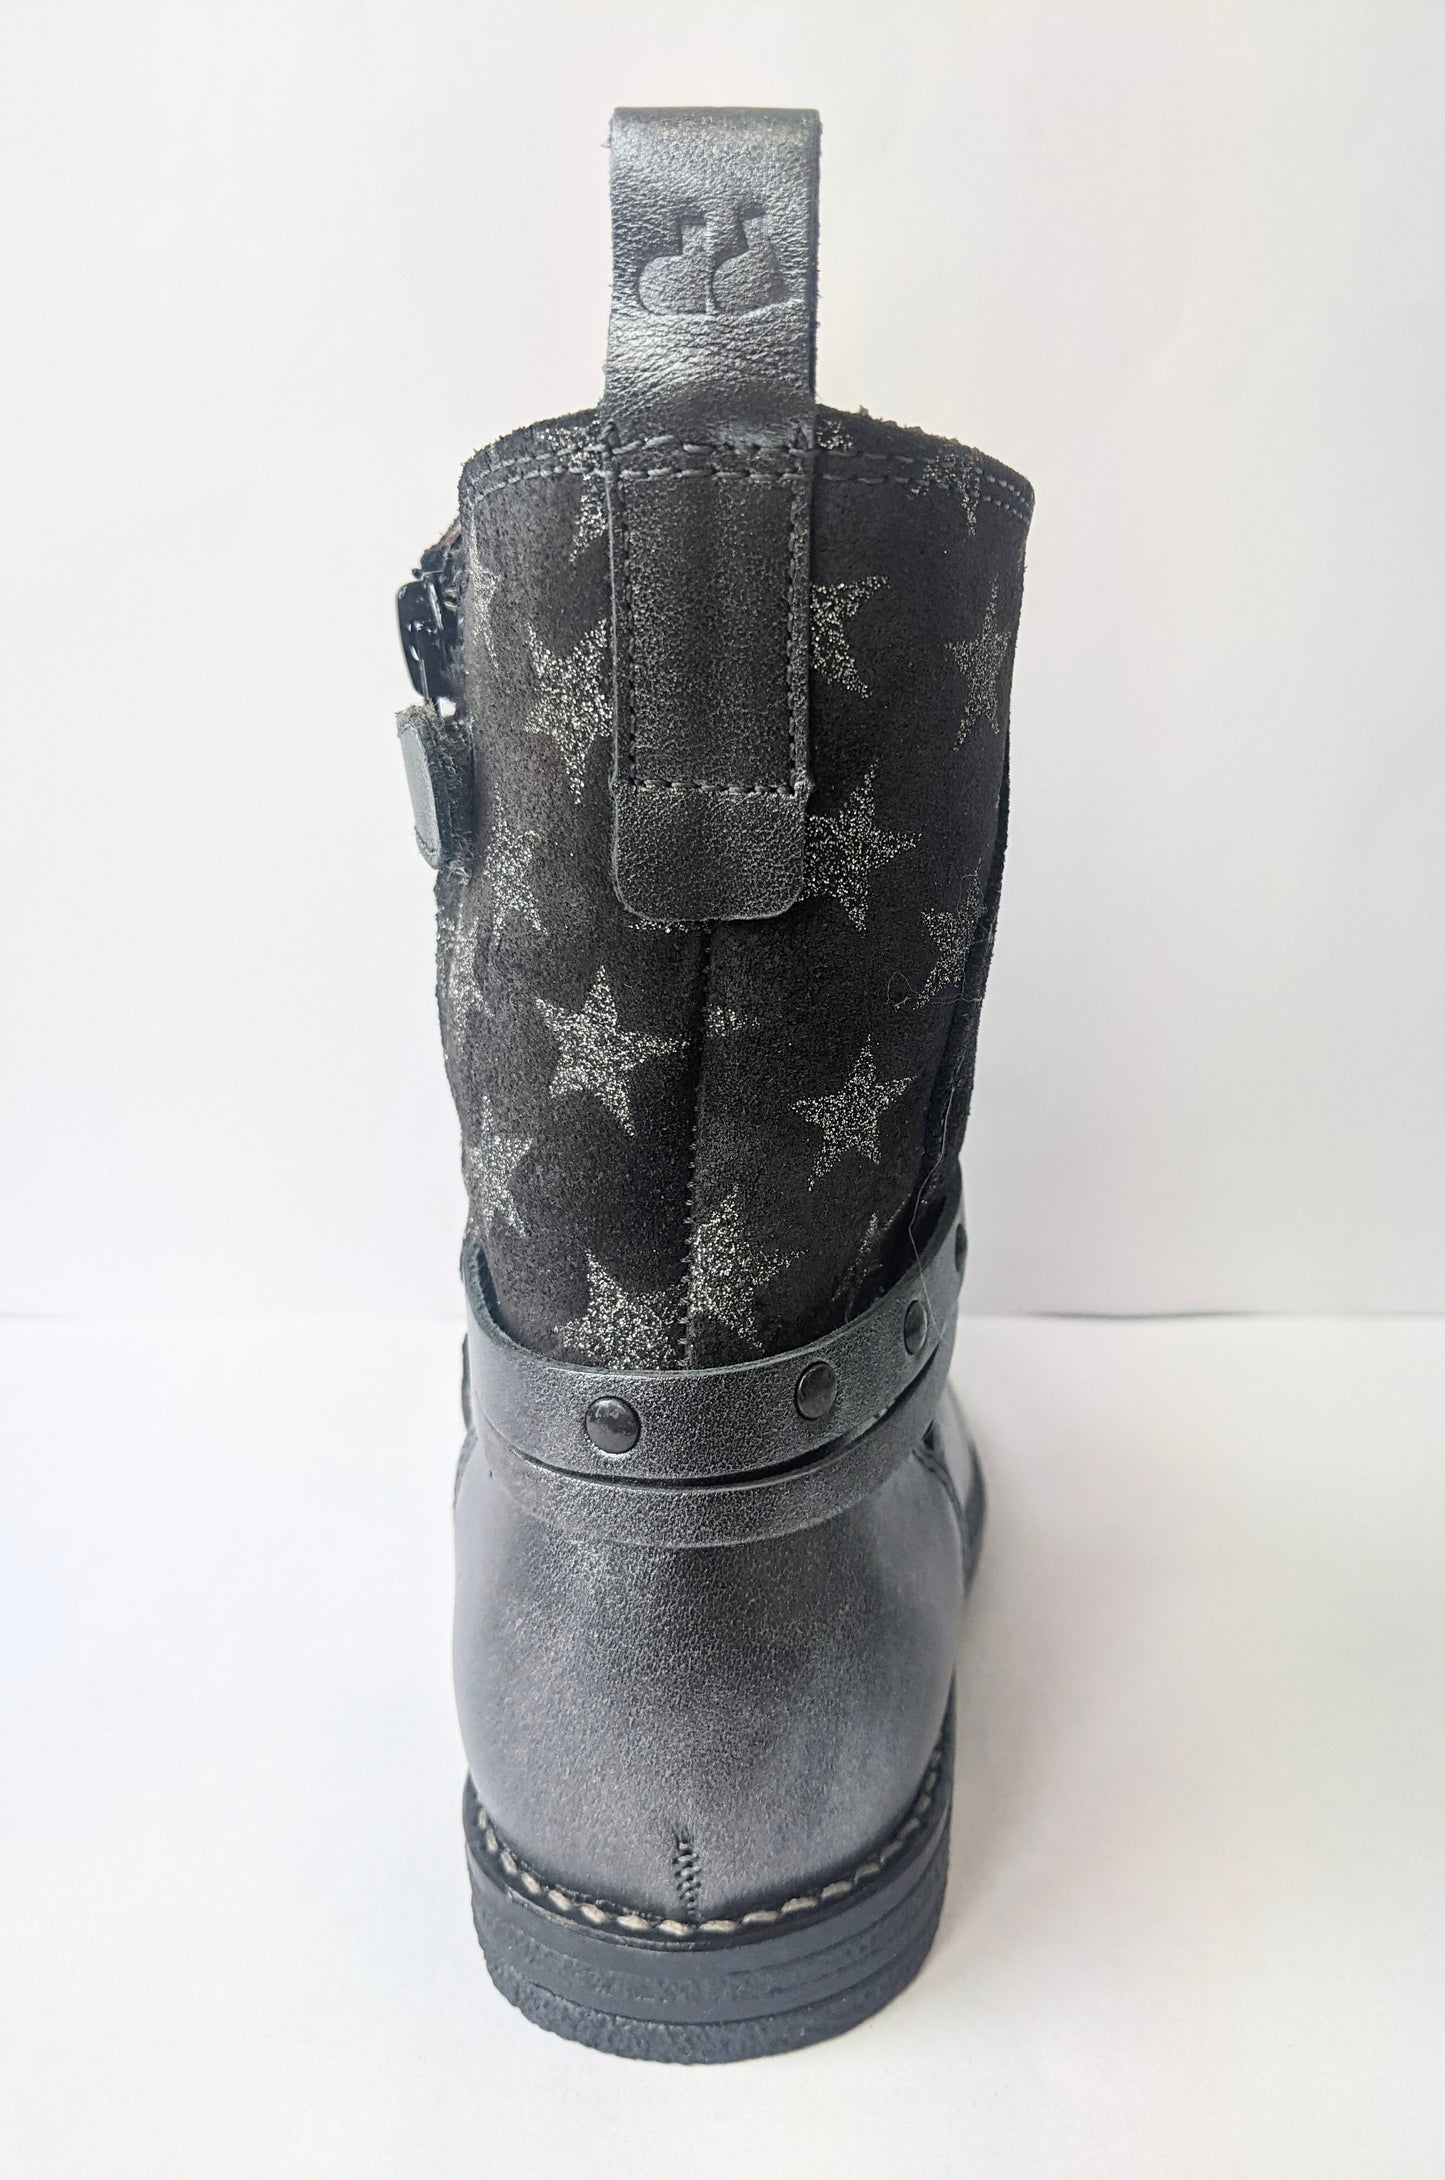 A girls calf boot by Froddo, style G3160085-2,in silver leather and star print nubuck with zip fastening. Back view.